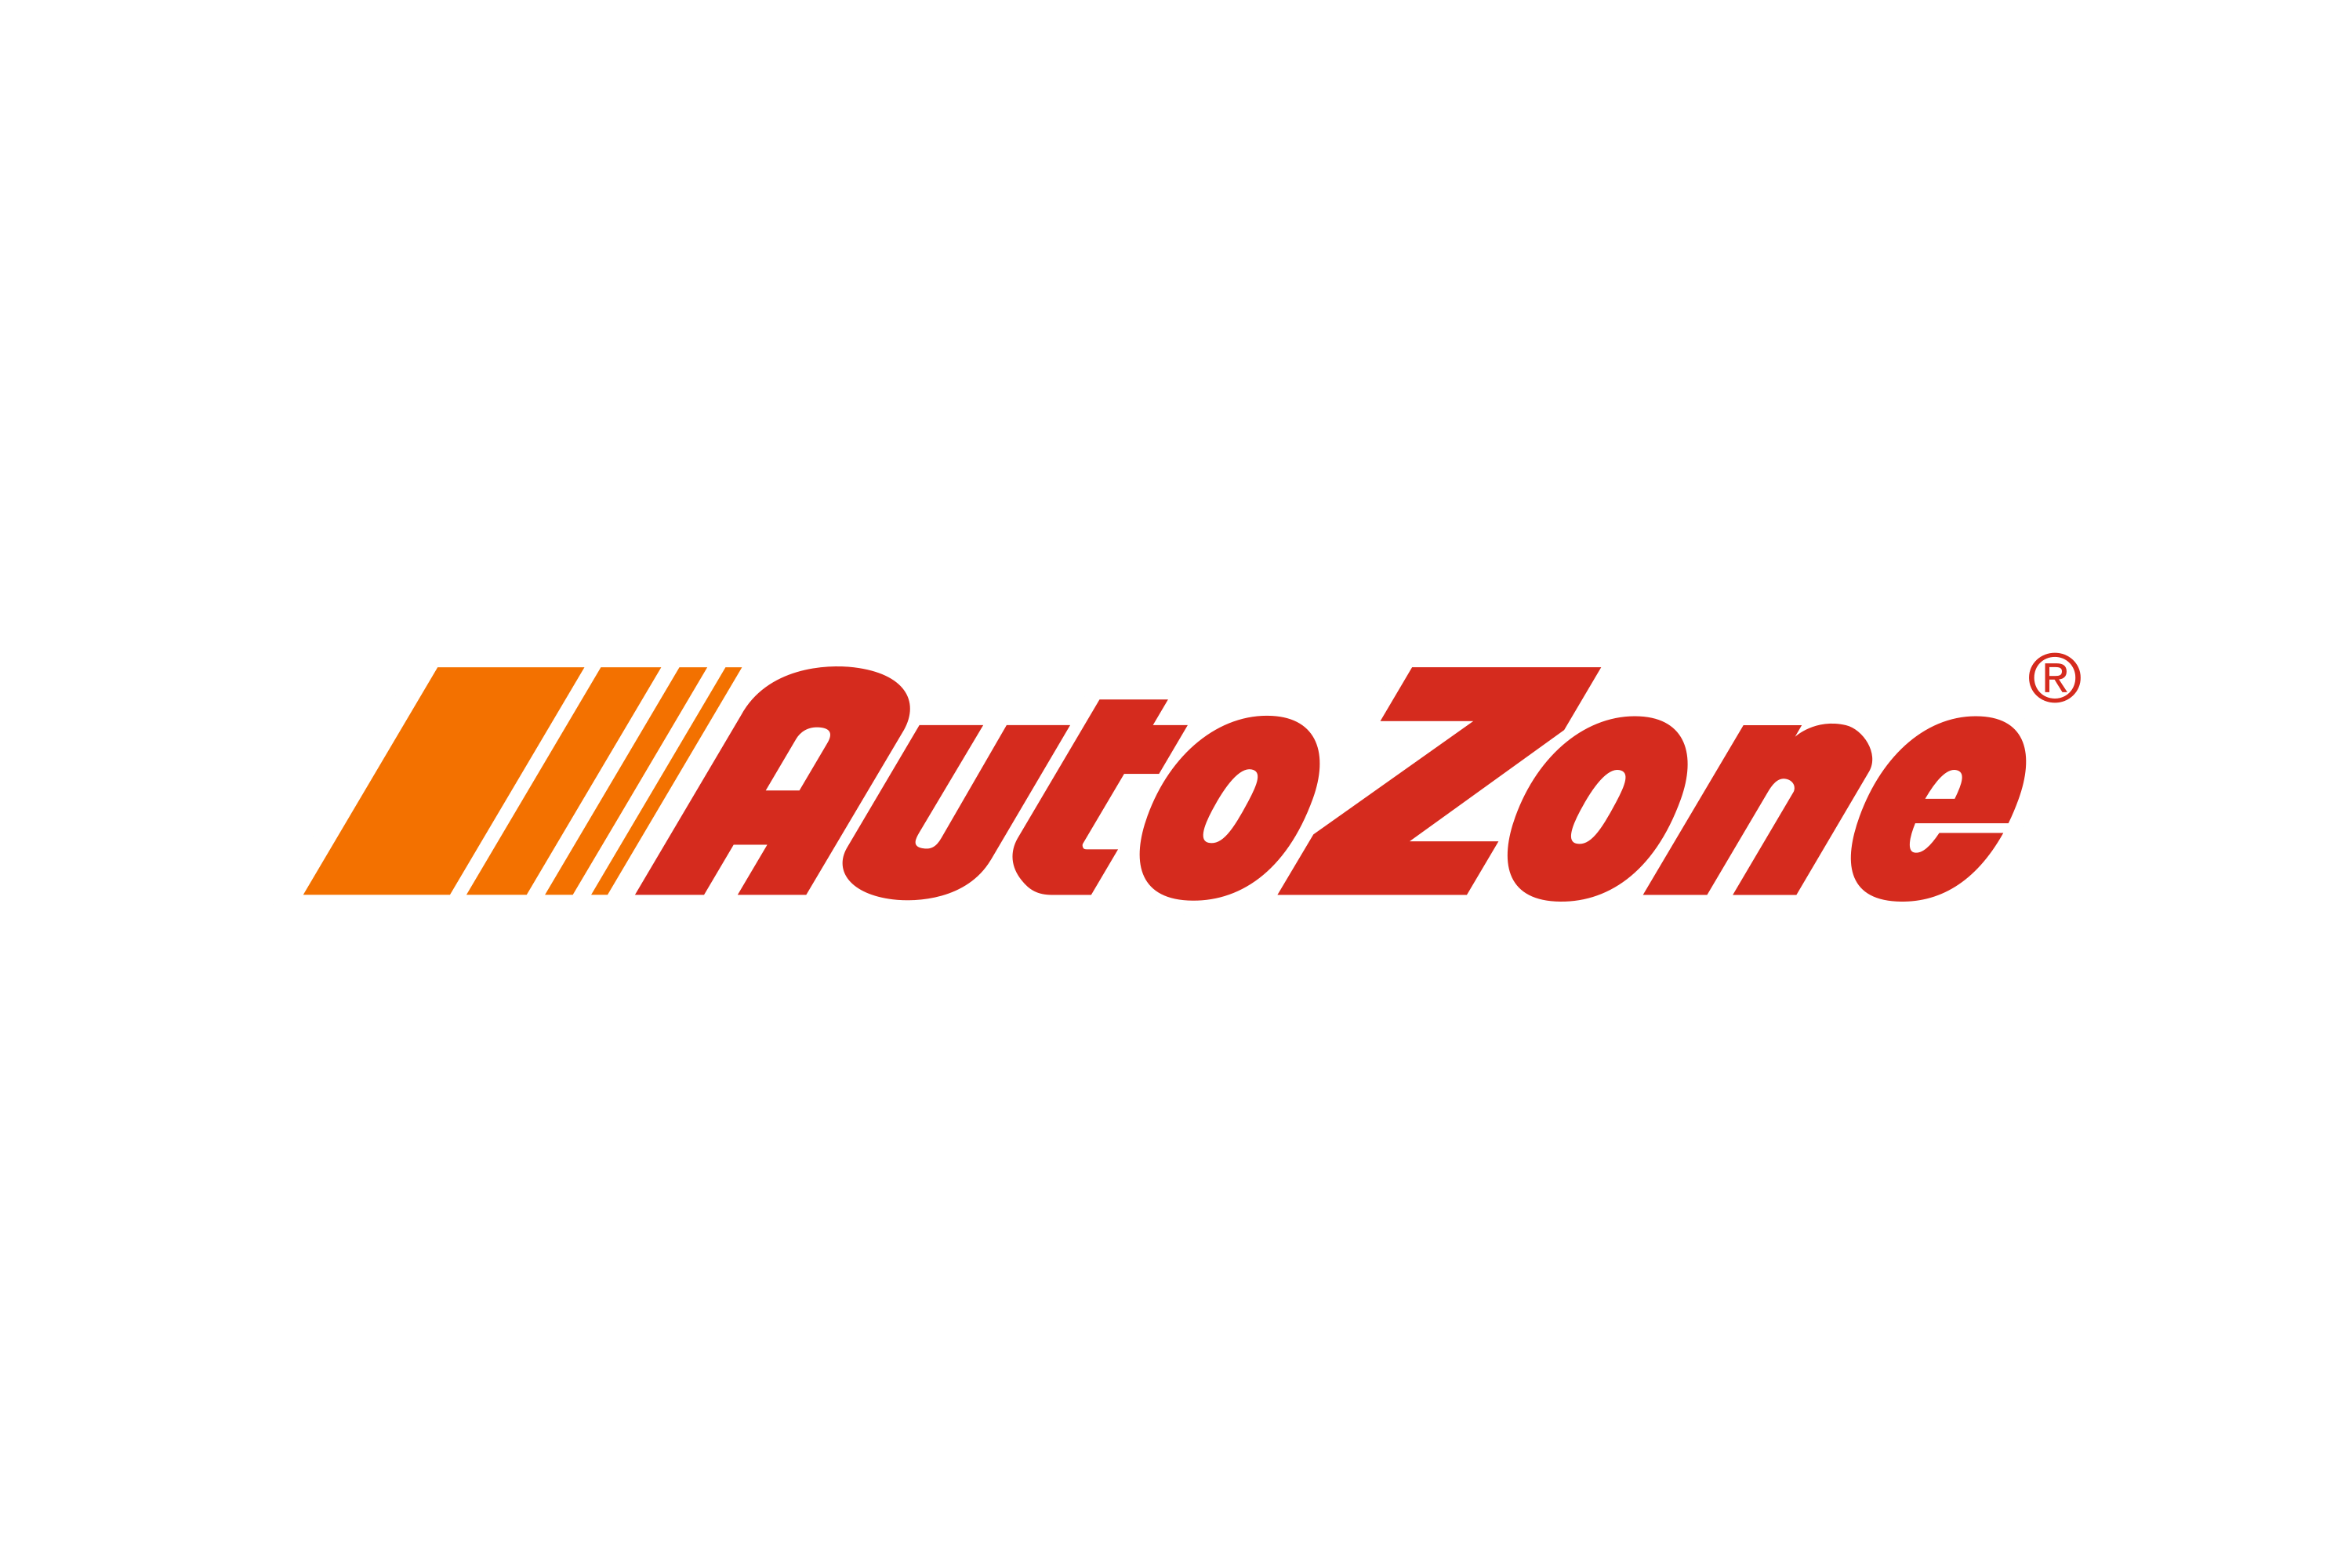 Download AutoZone Logo in SVG Vector or PNG File Format - Logo.wine